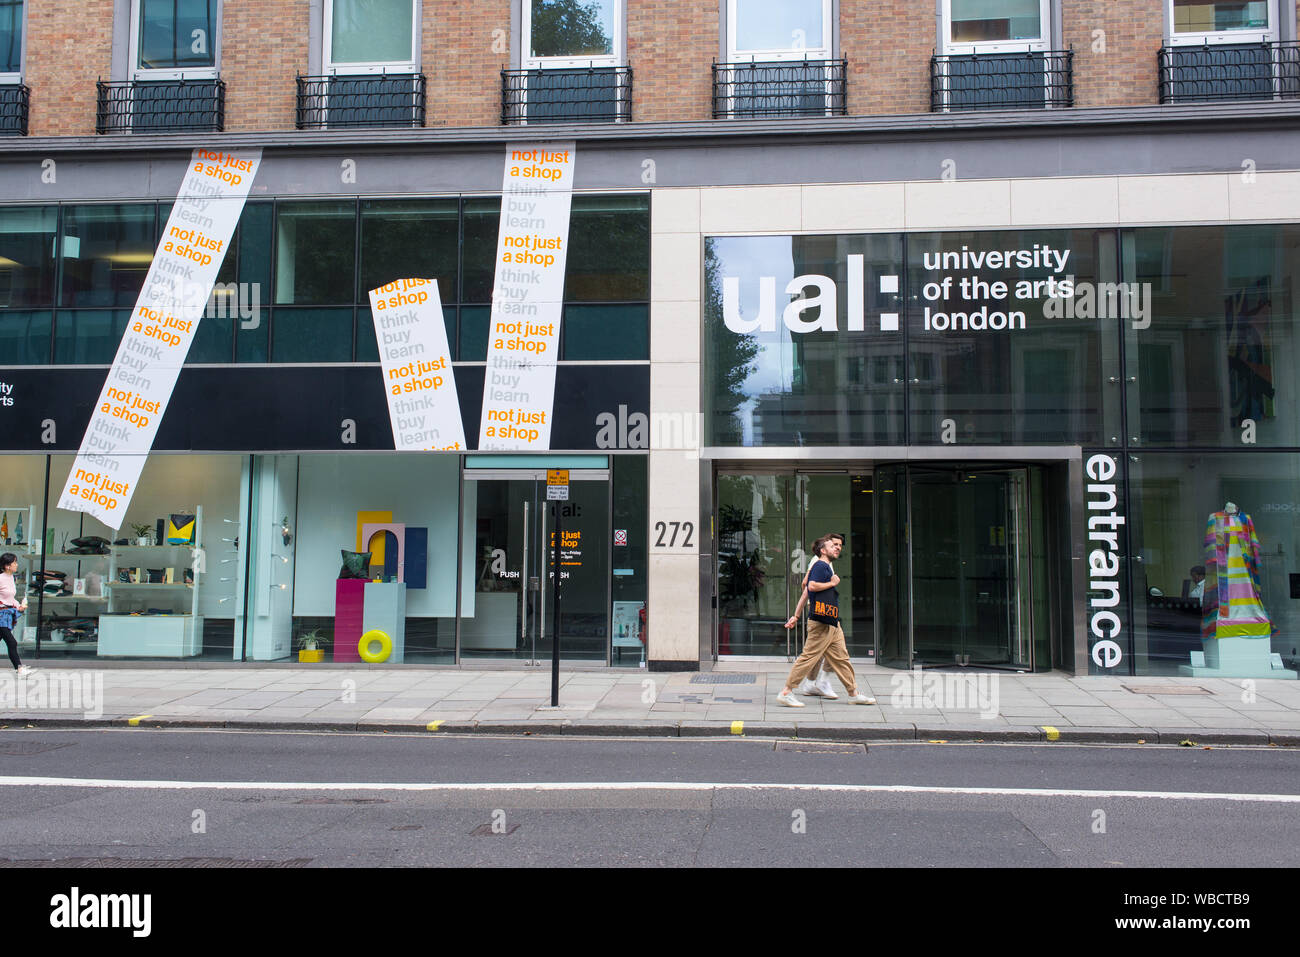 London, UK - August  2019: Men couple students walking in front of the main entrance of ual, University of the arts london, in High Holborn, London Stock Photo